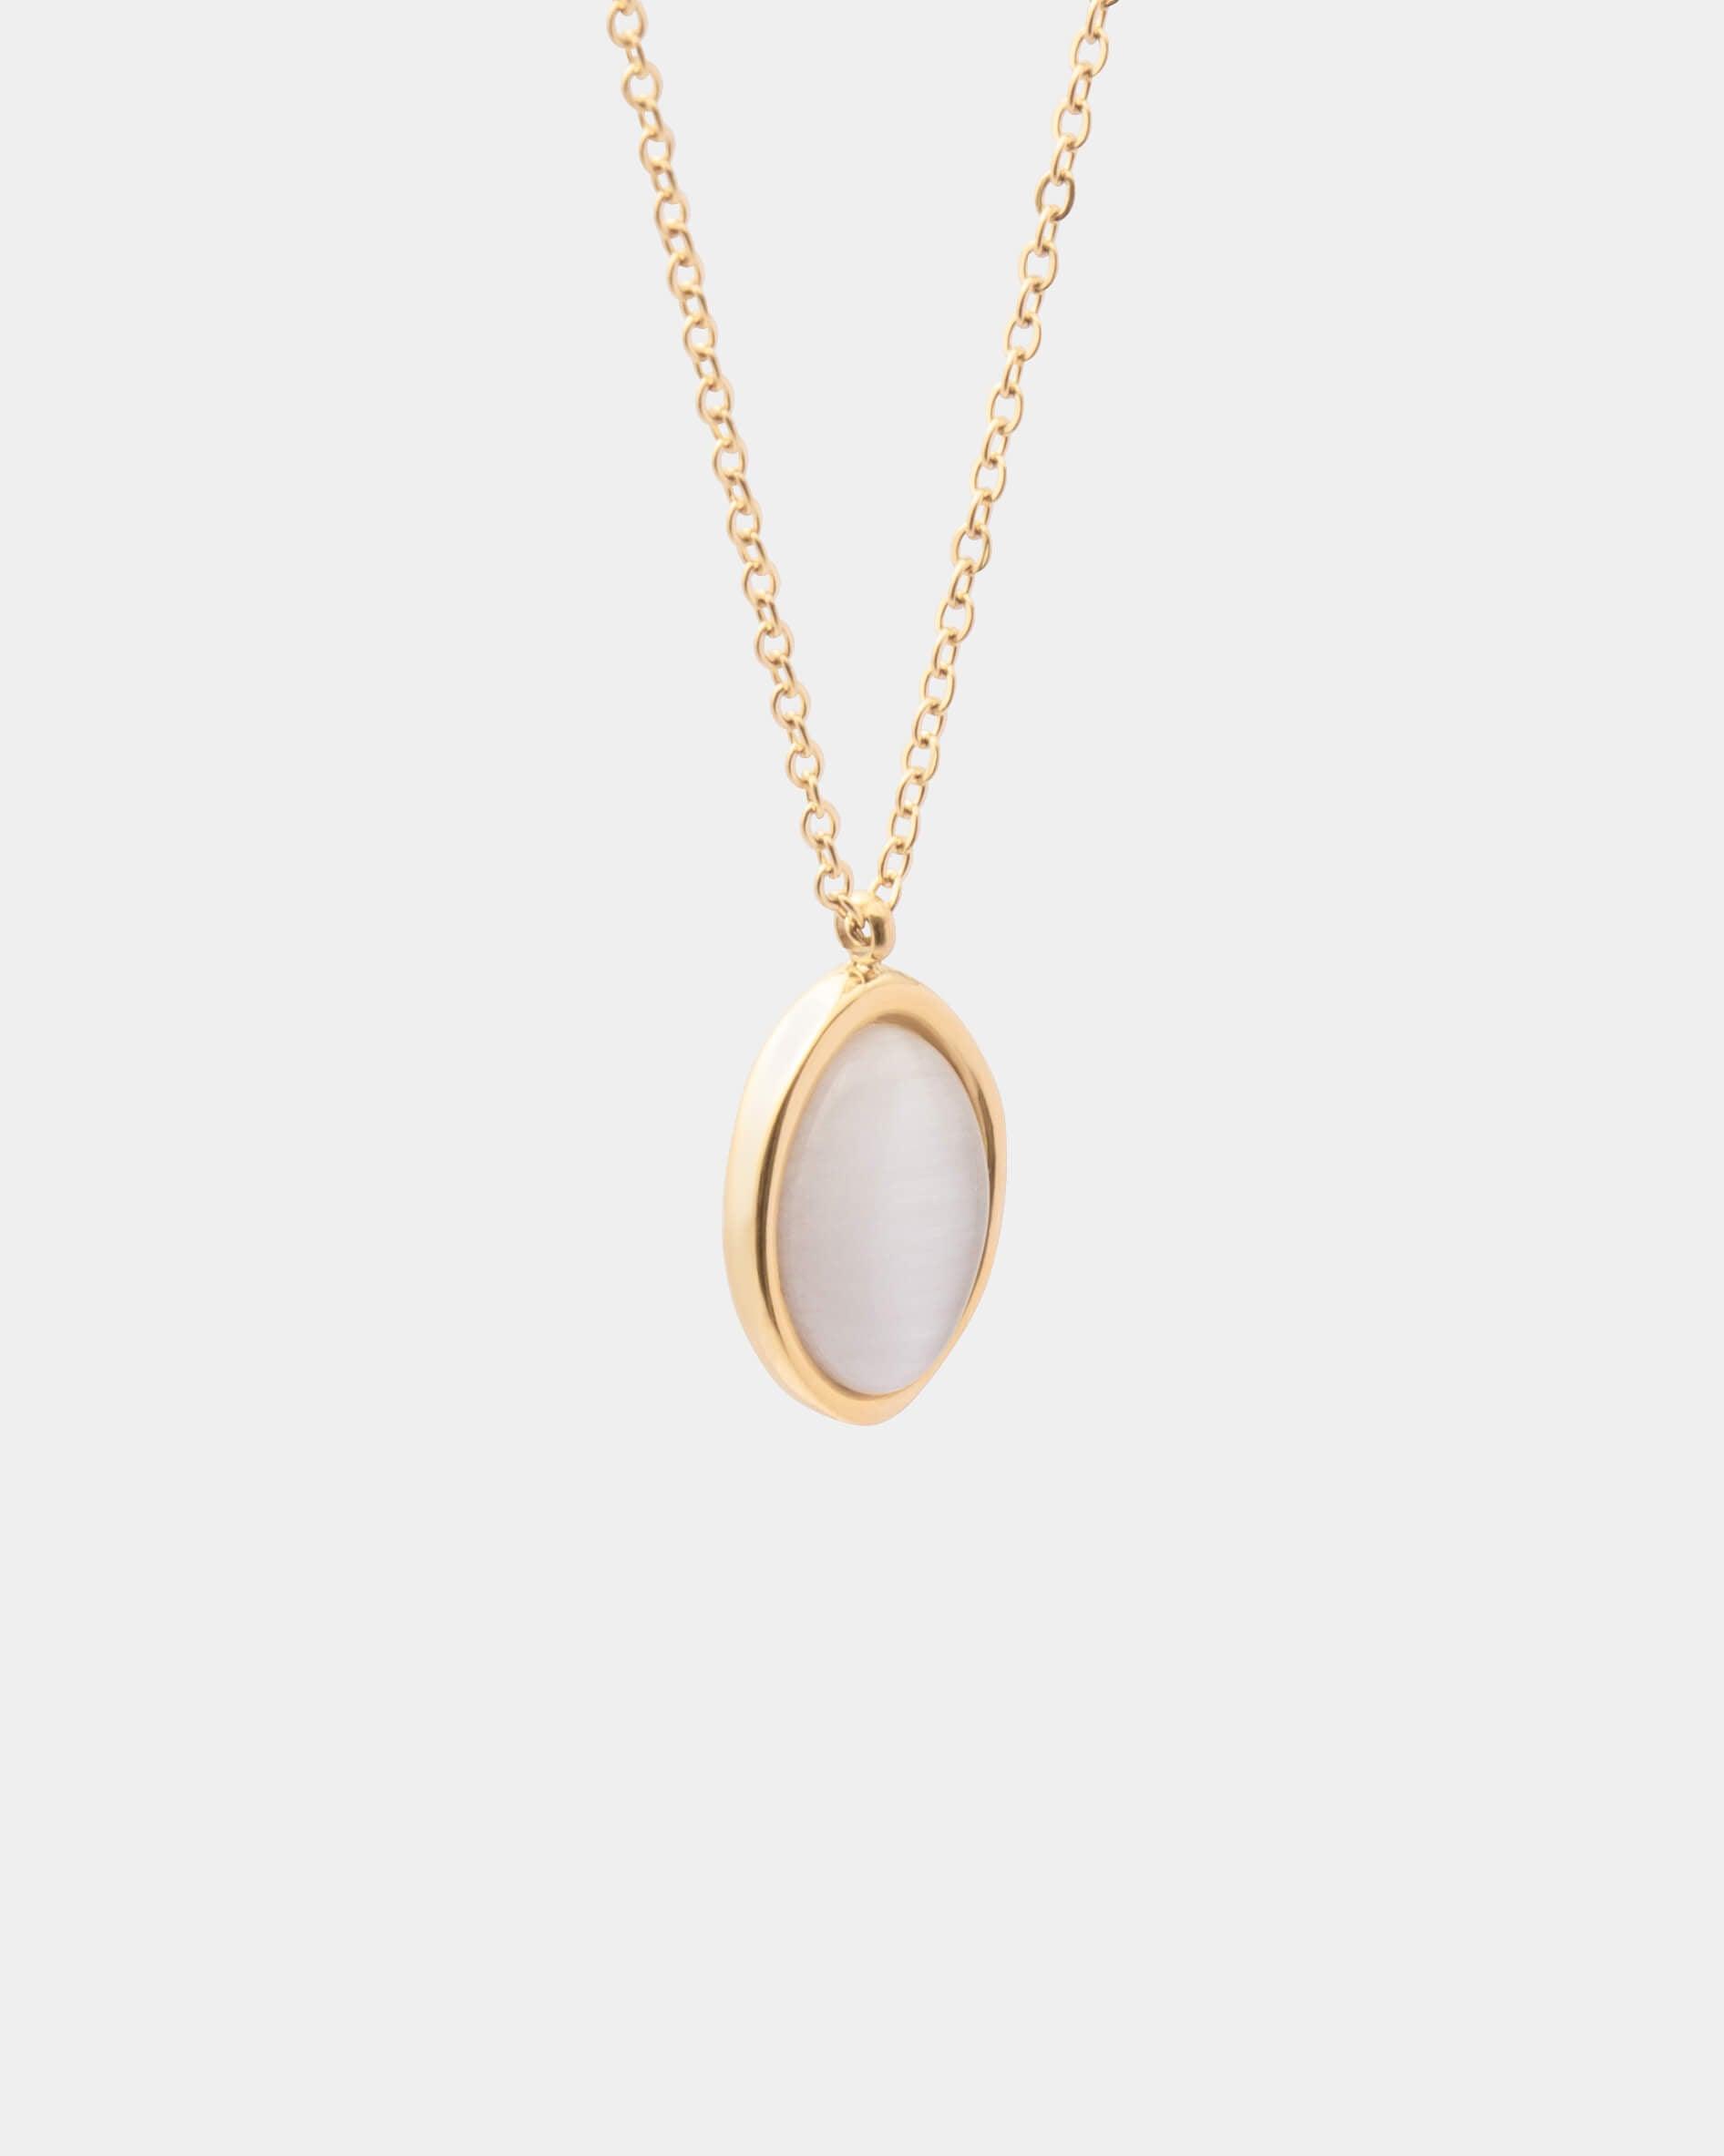 OVAL STONE NECLACE - LIMELY